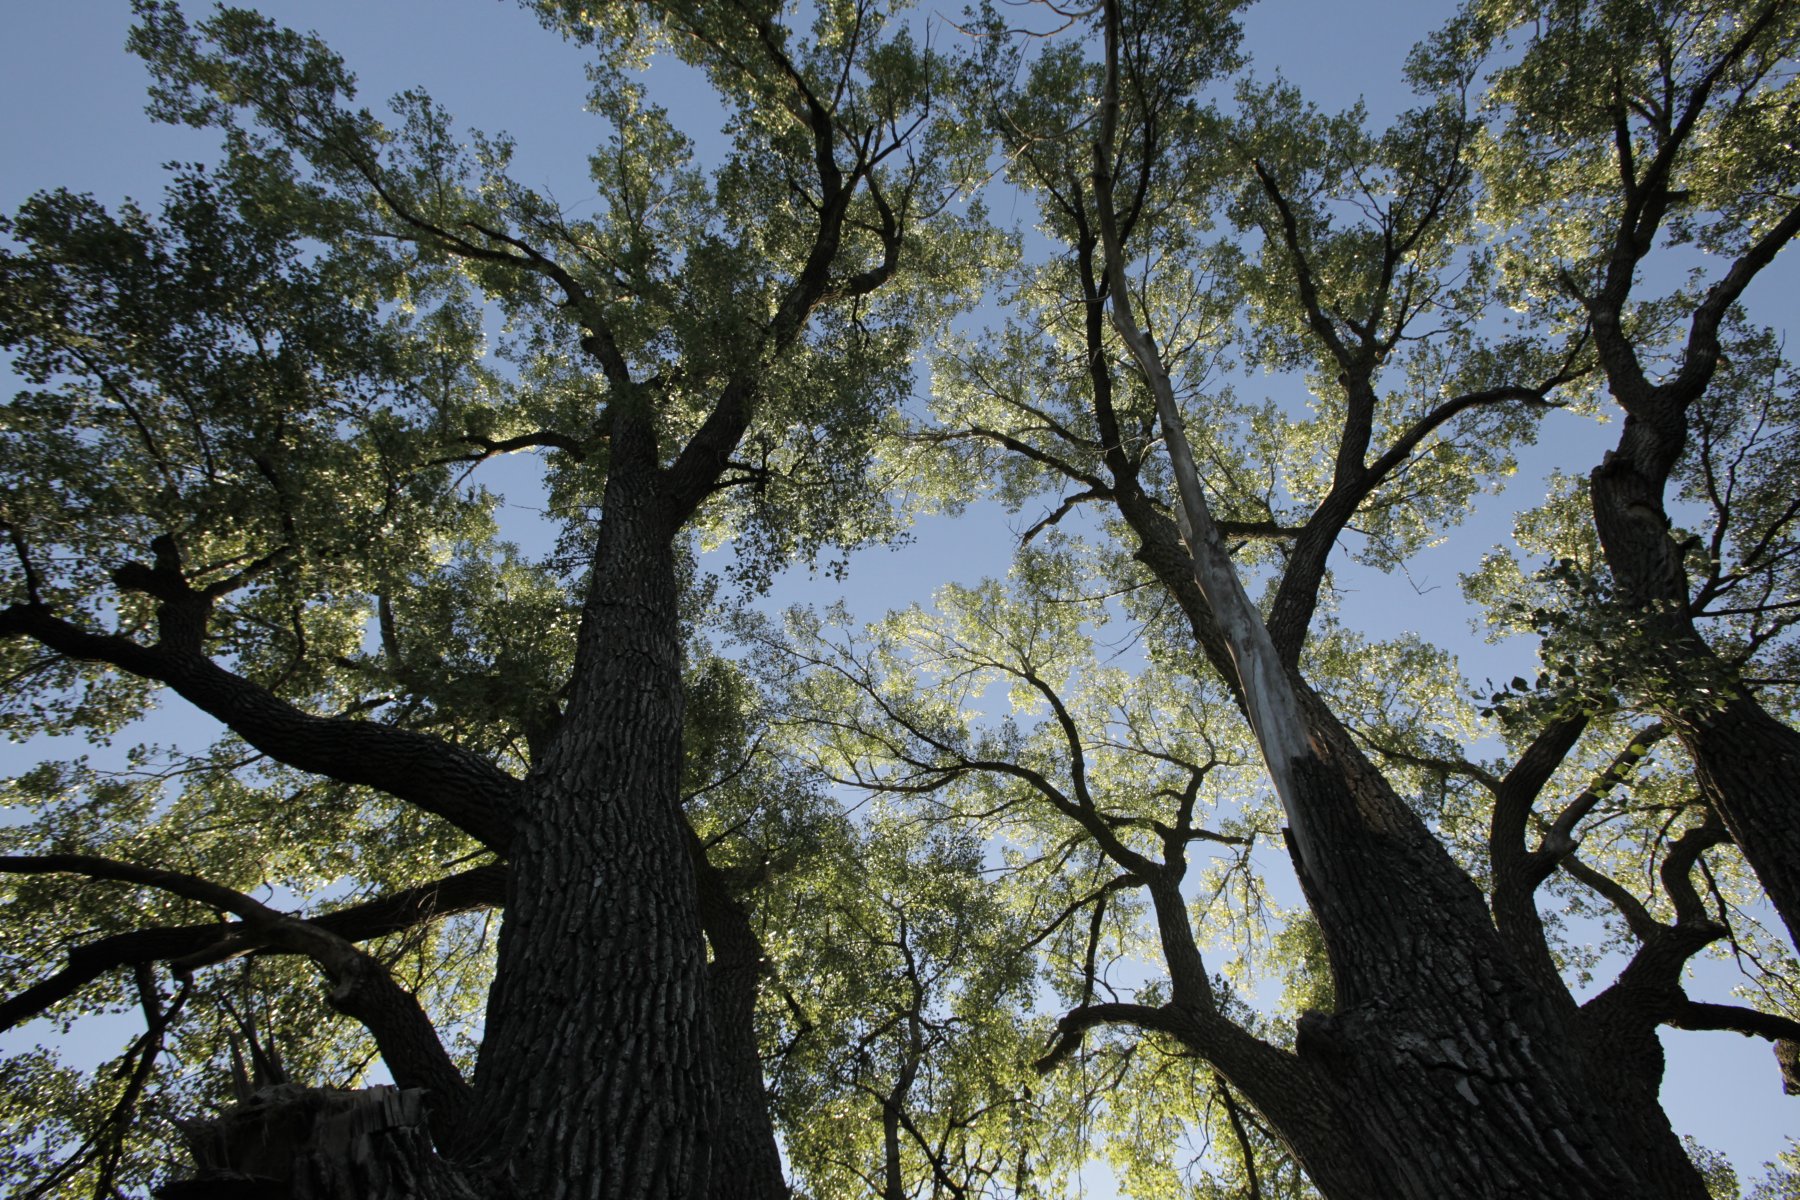 Looking up at the largest Eastern Cottonwood in Nebraska.